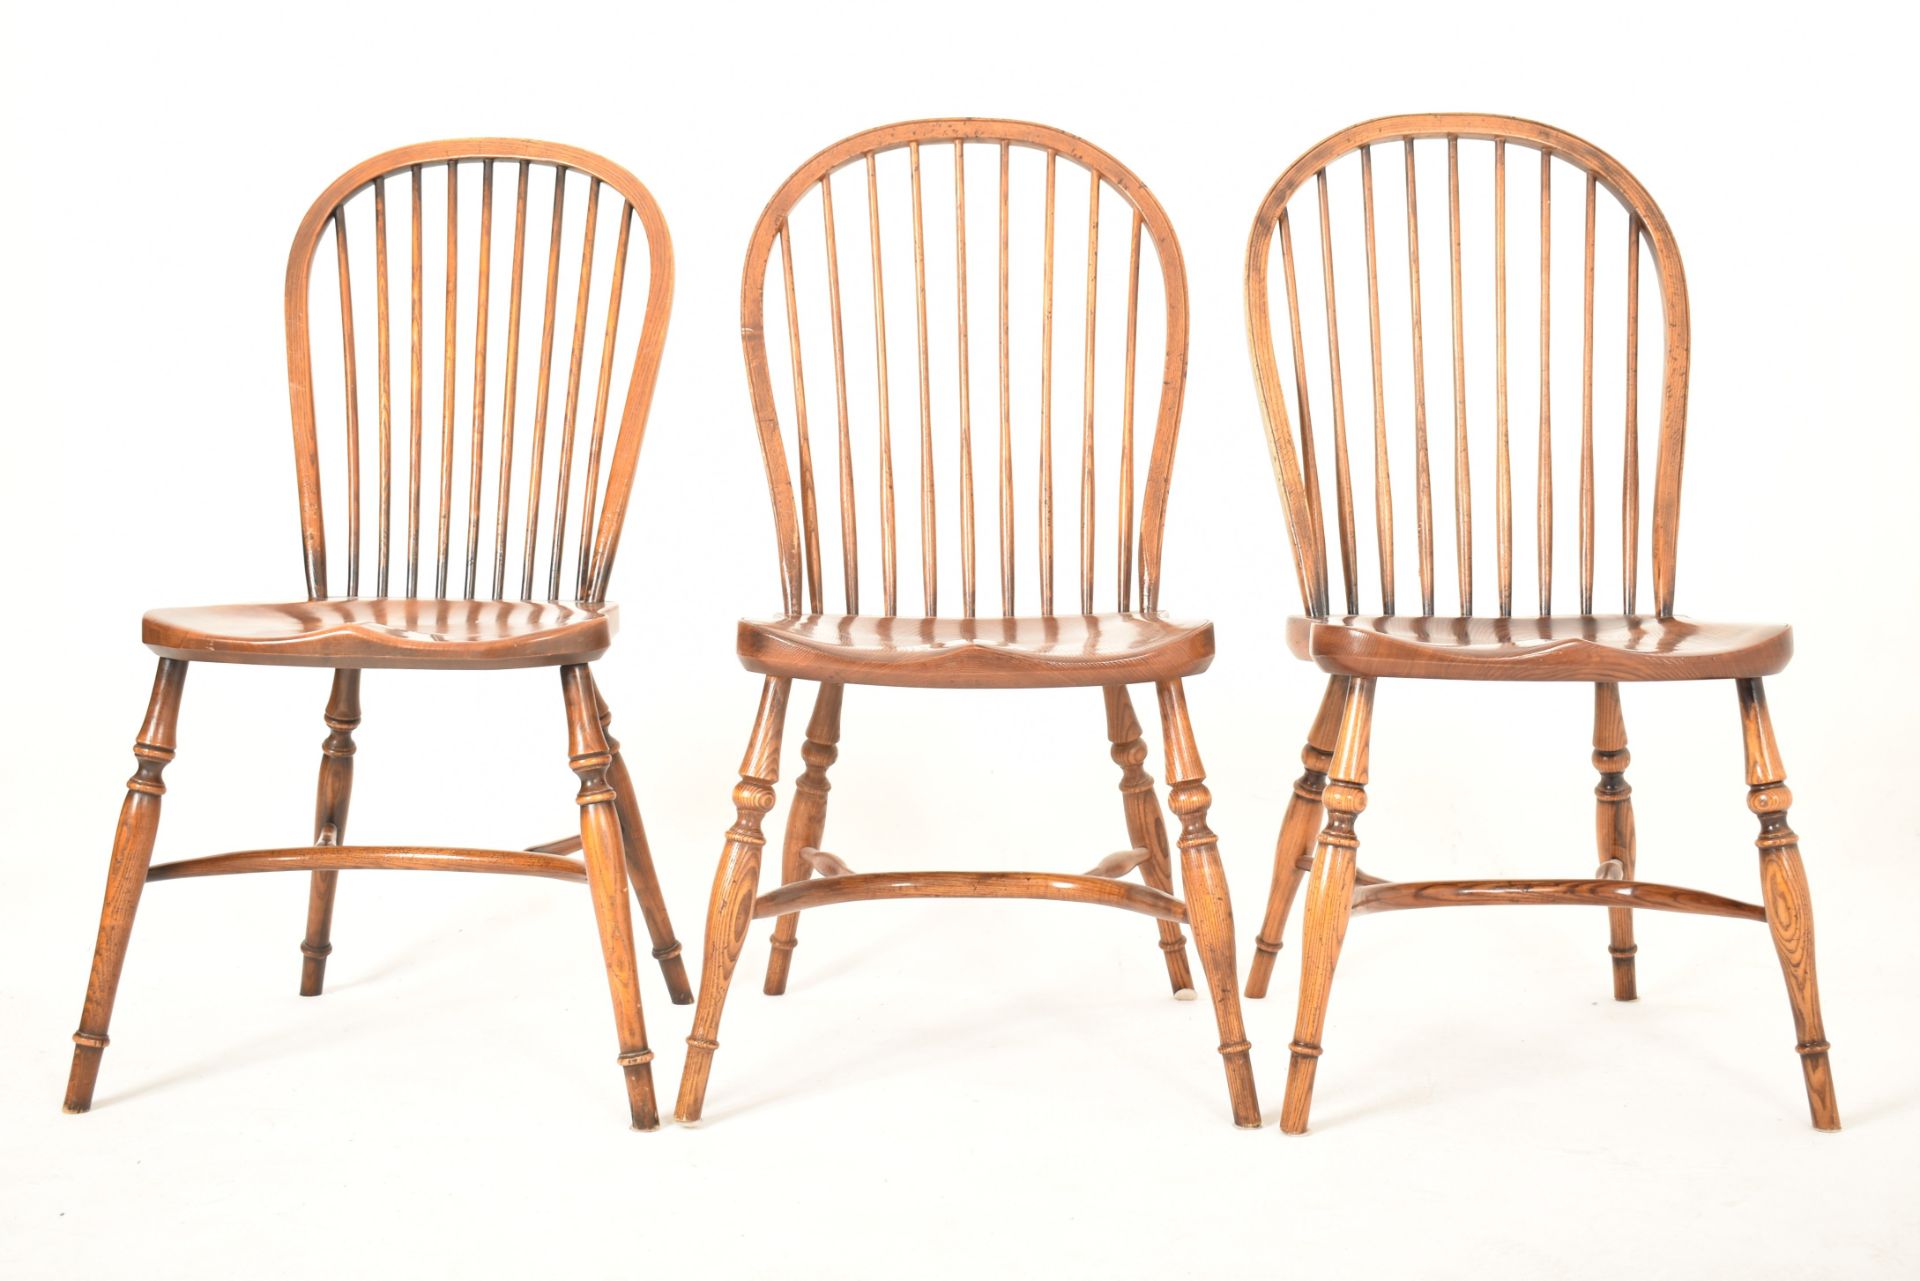 STEWART LINFORD FURNITURE - SIX WINDSOR STYLE STICK BACK CHAIRS - Image 7 of 8